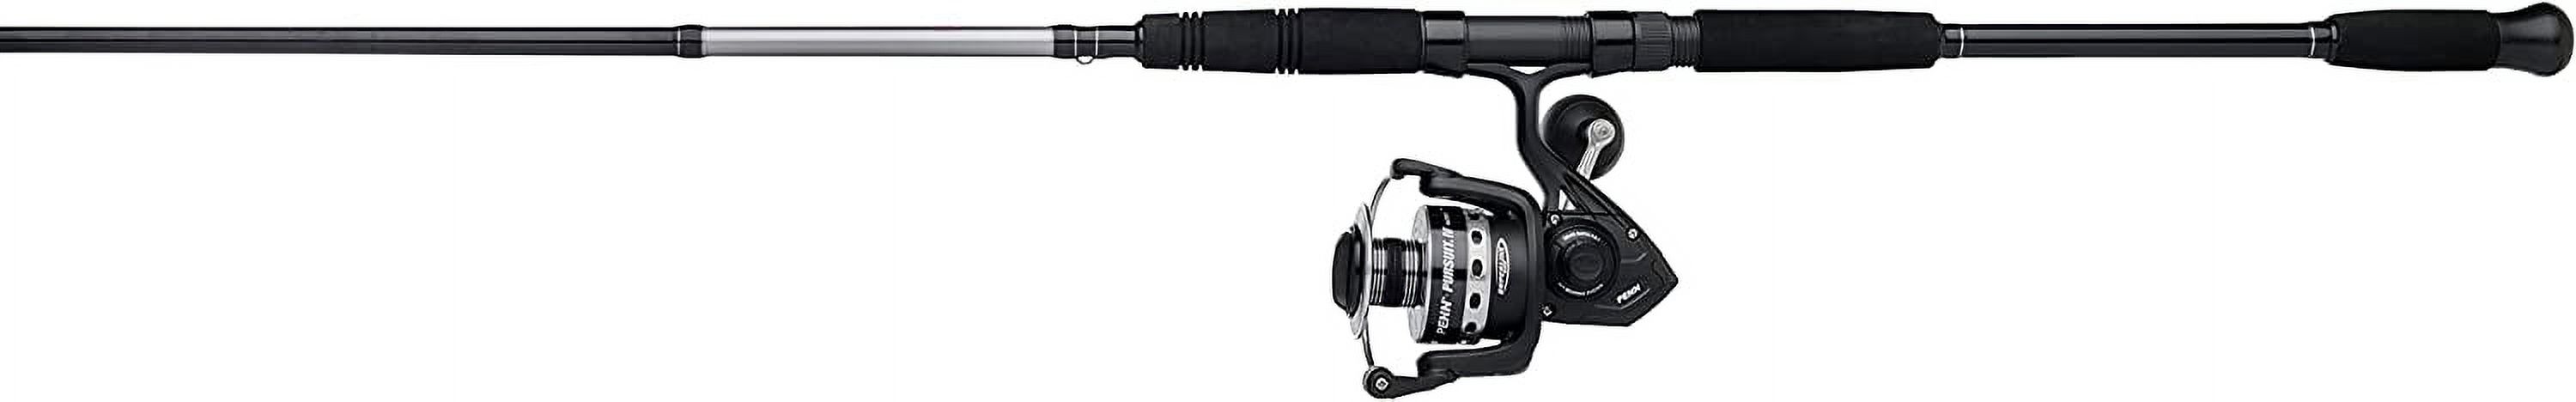 PENN 7' Pursuit IV Fishing Rod and Reel Inshore Spinning Combo - image 4 of 6